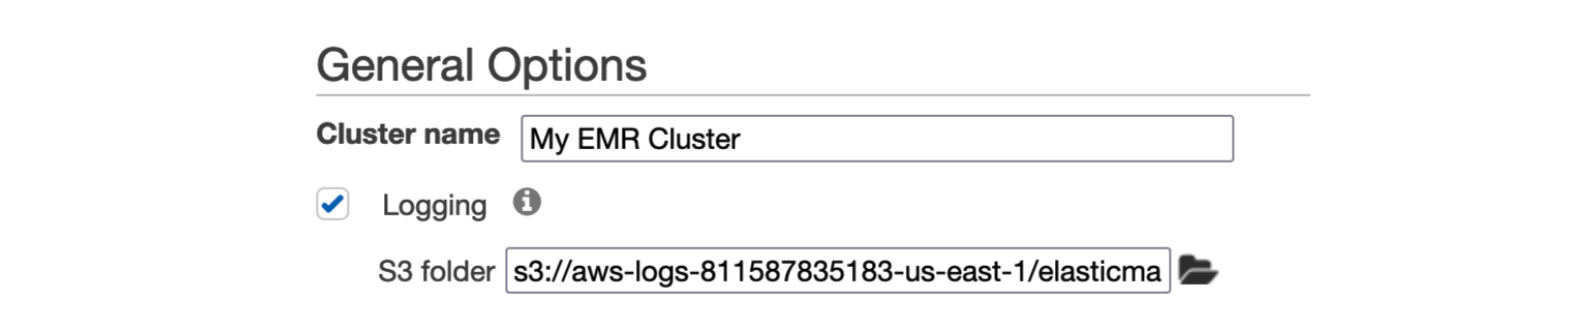 Amazon EMR - Archiving cluster logs to S3